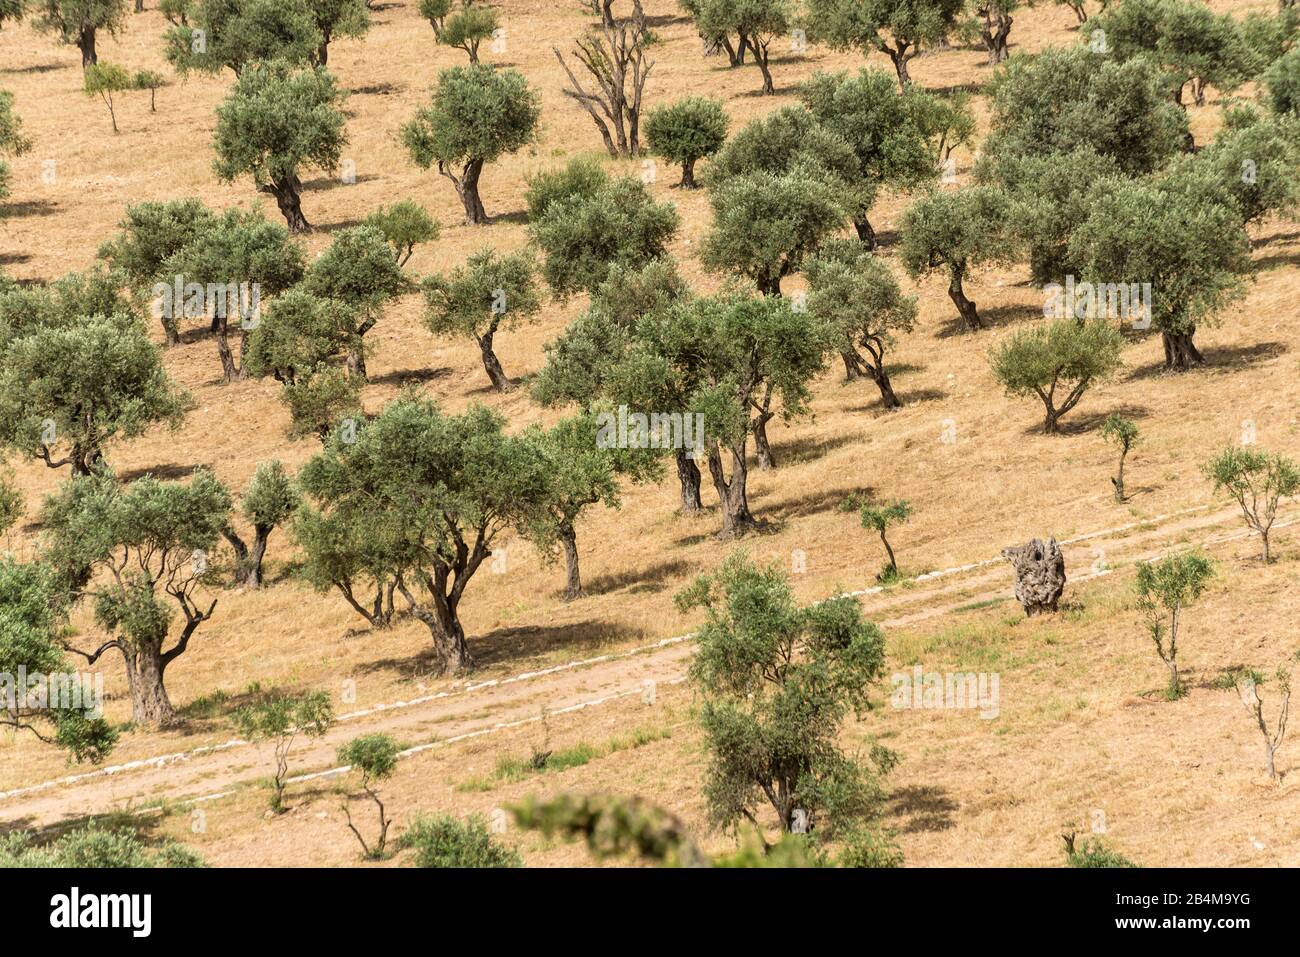 Middle East, Israel, Jerusalem, Olive Tree Grove in Dry Environment Stock Photo